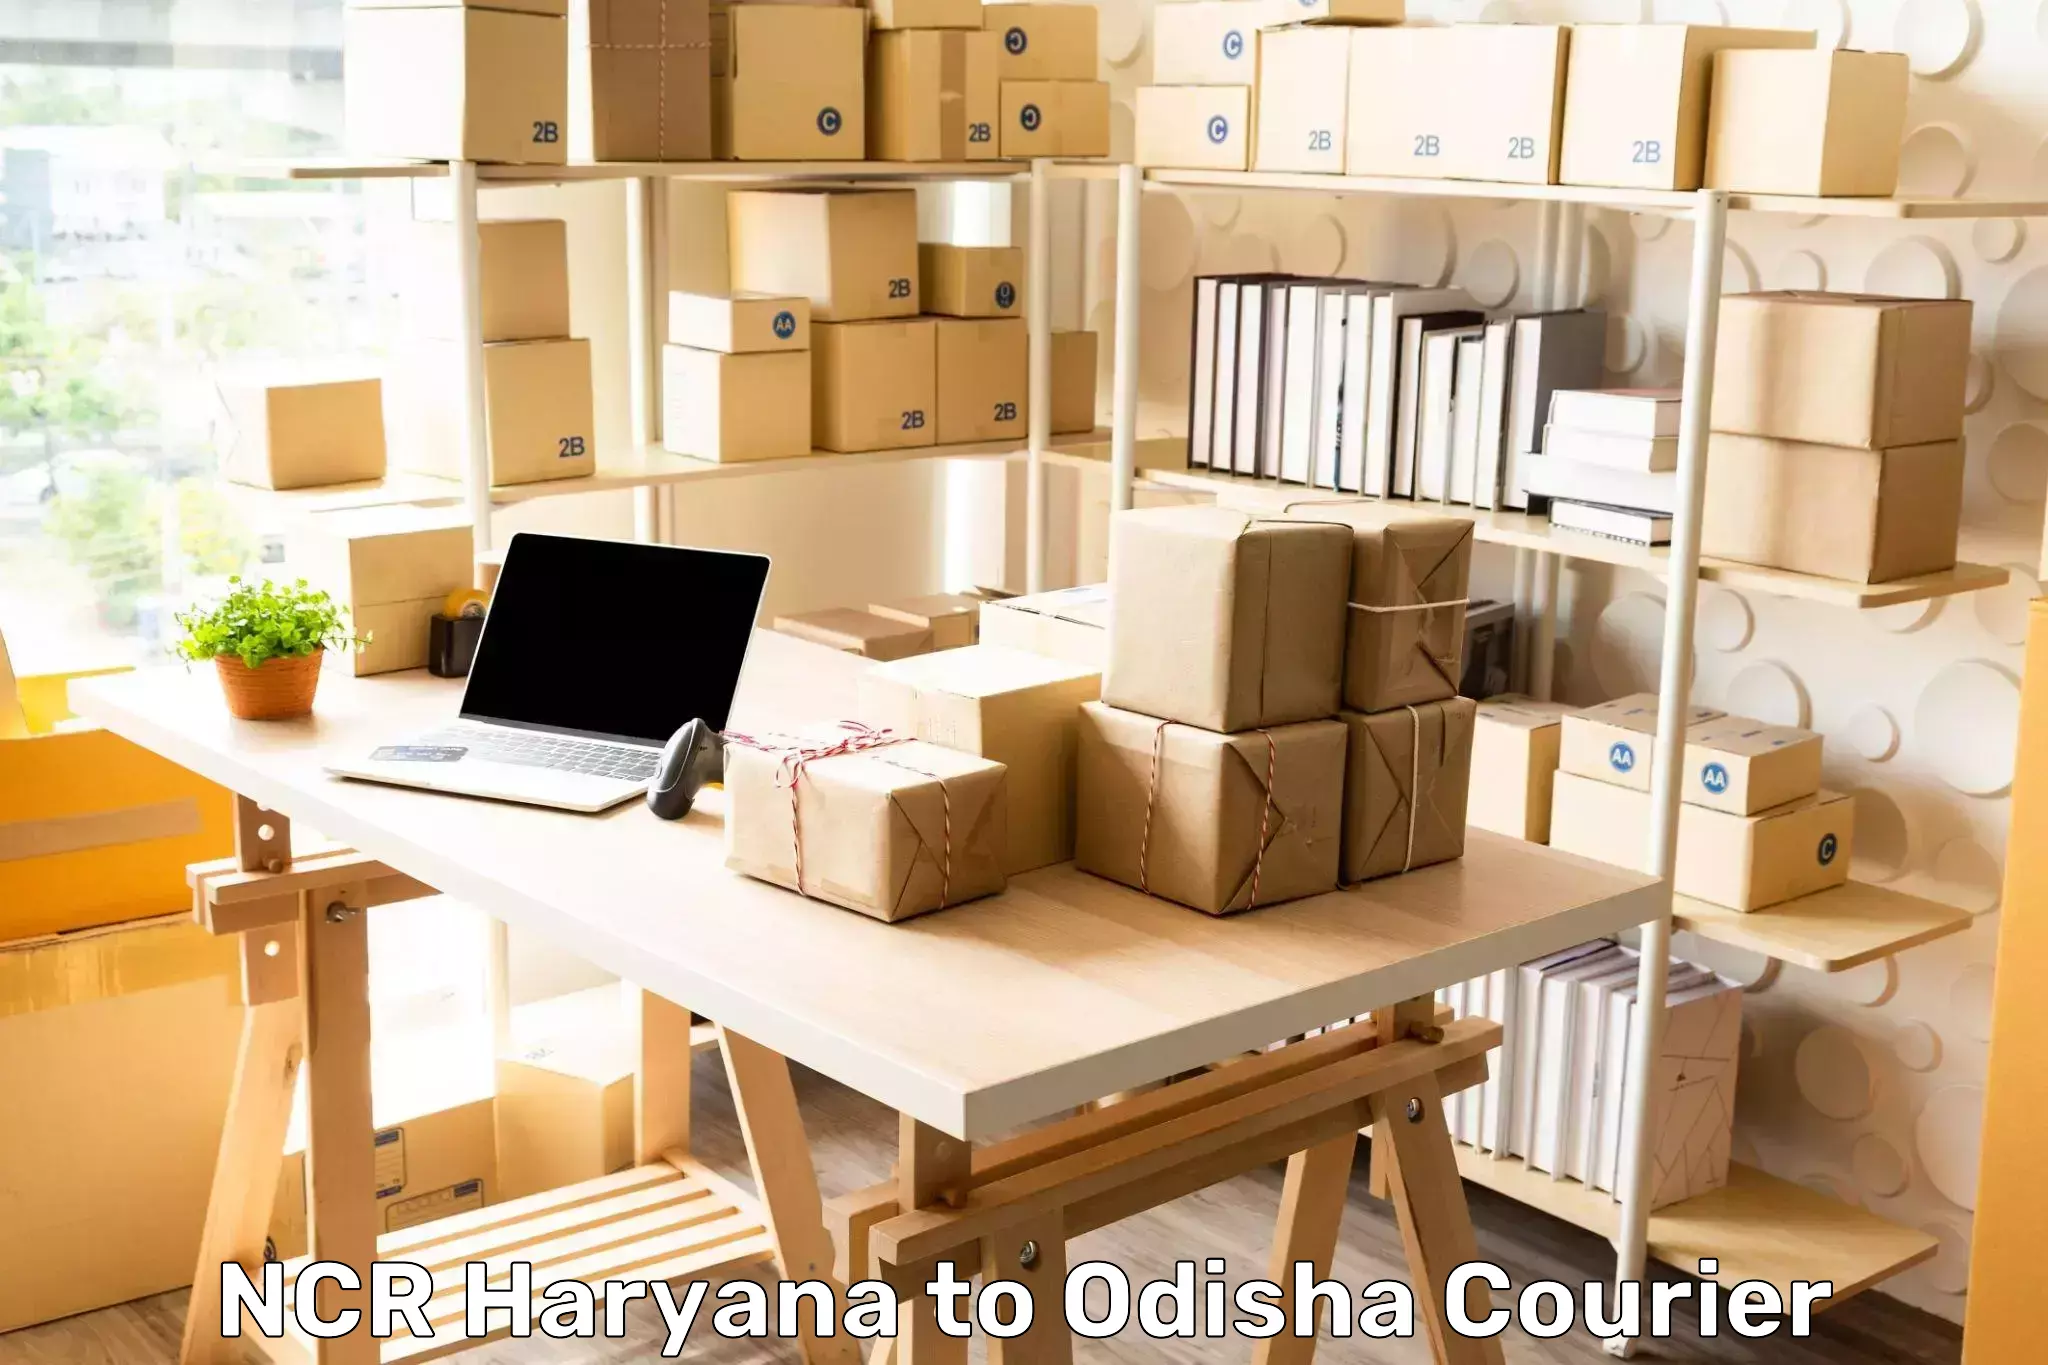 Tailored freight services NCR Haryana to Dandisahi